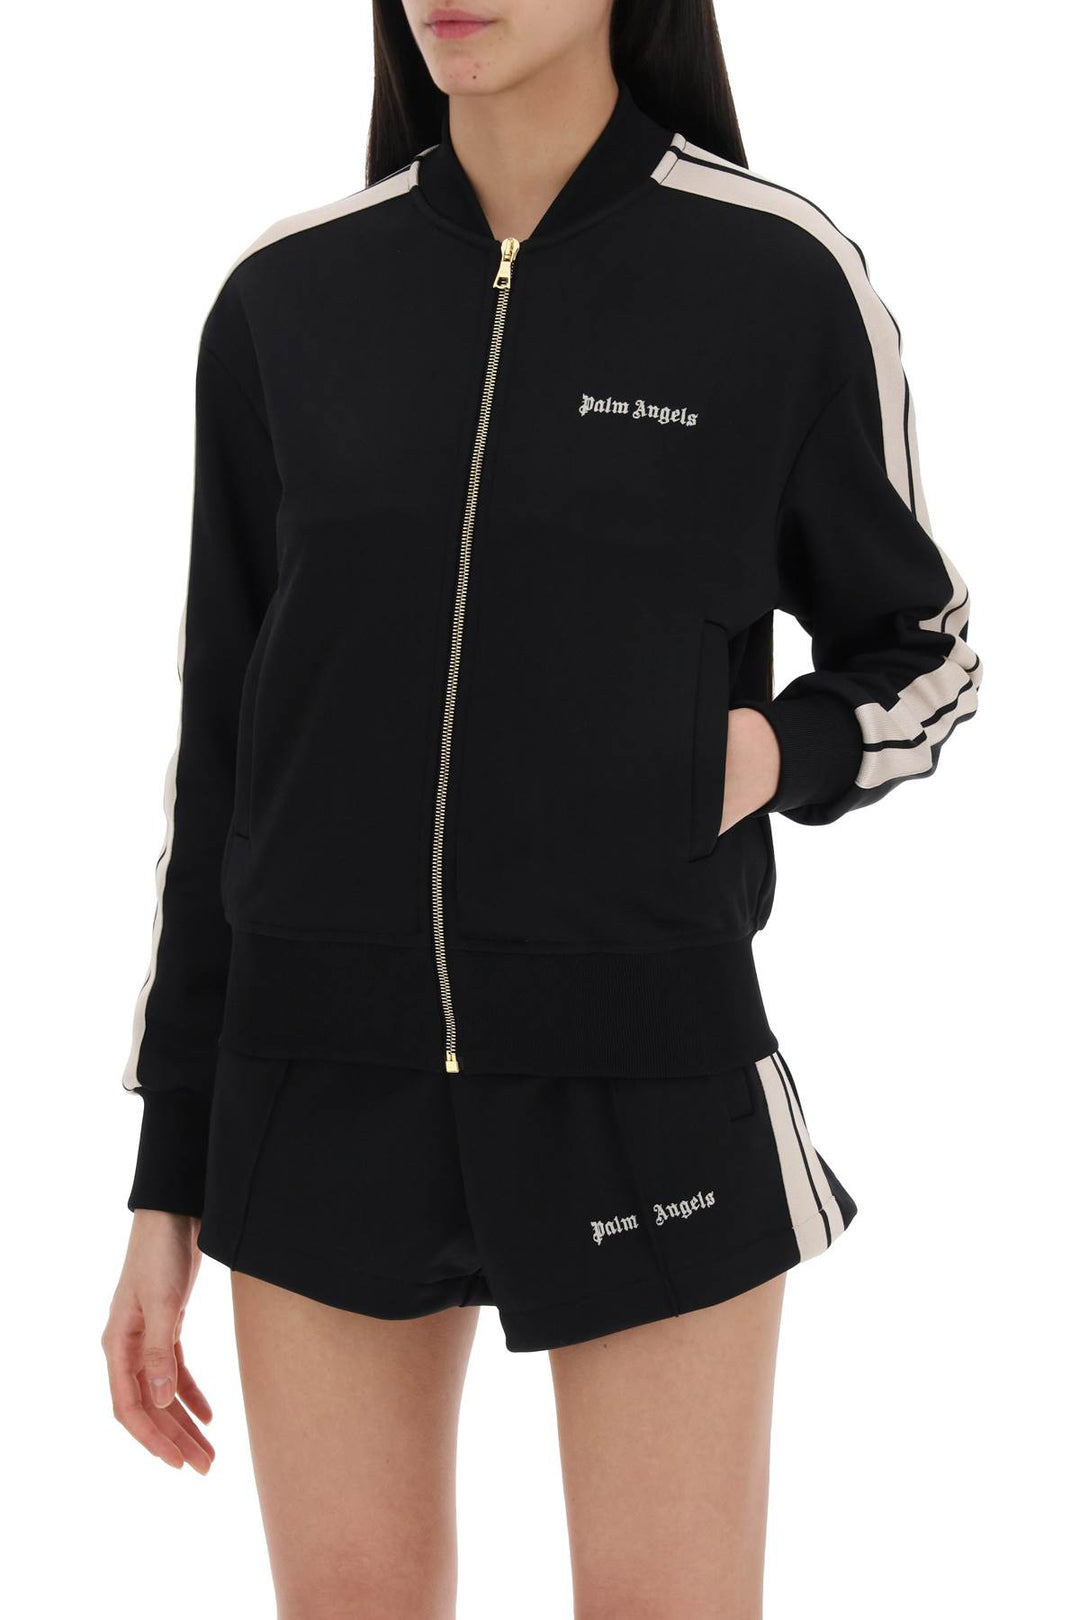 Palm Angels Track Sweatshirt With Contrast Bands   Nero